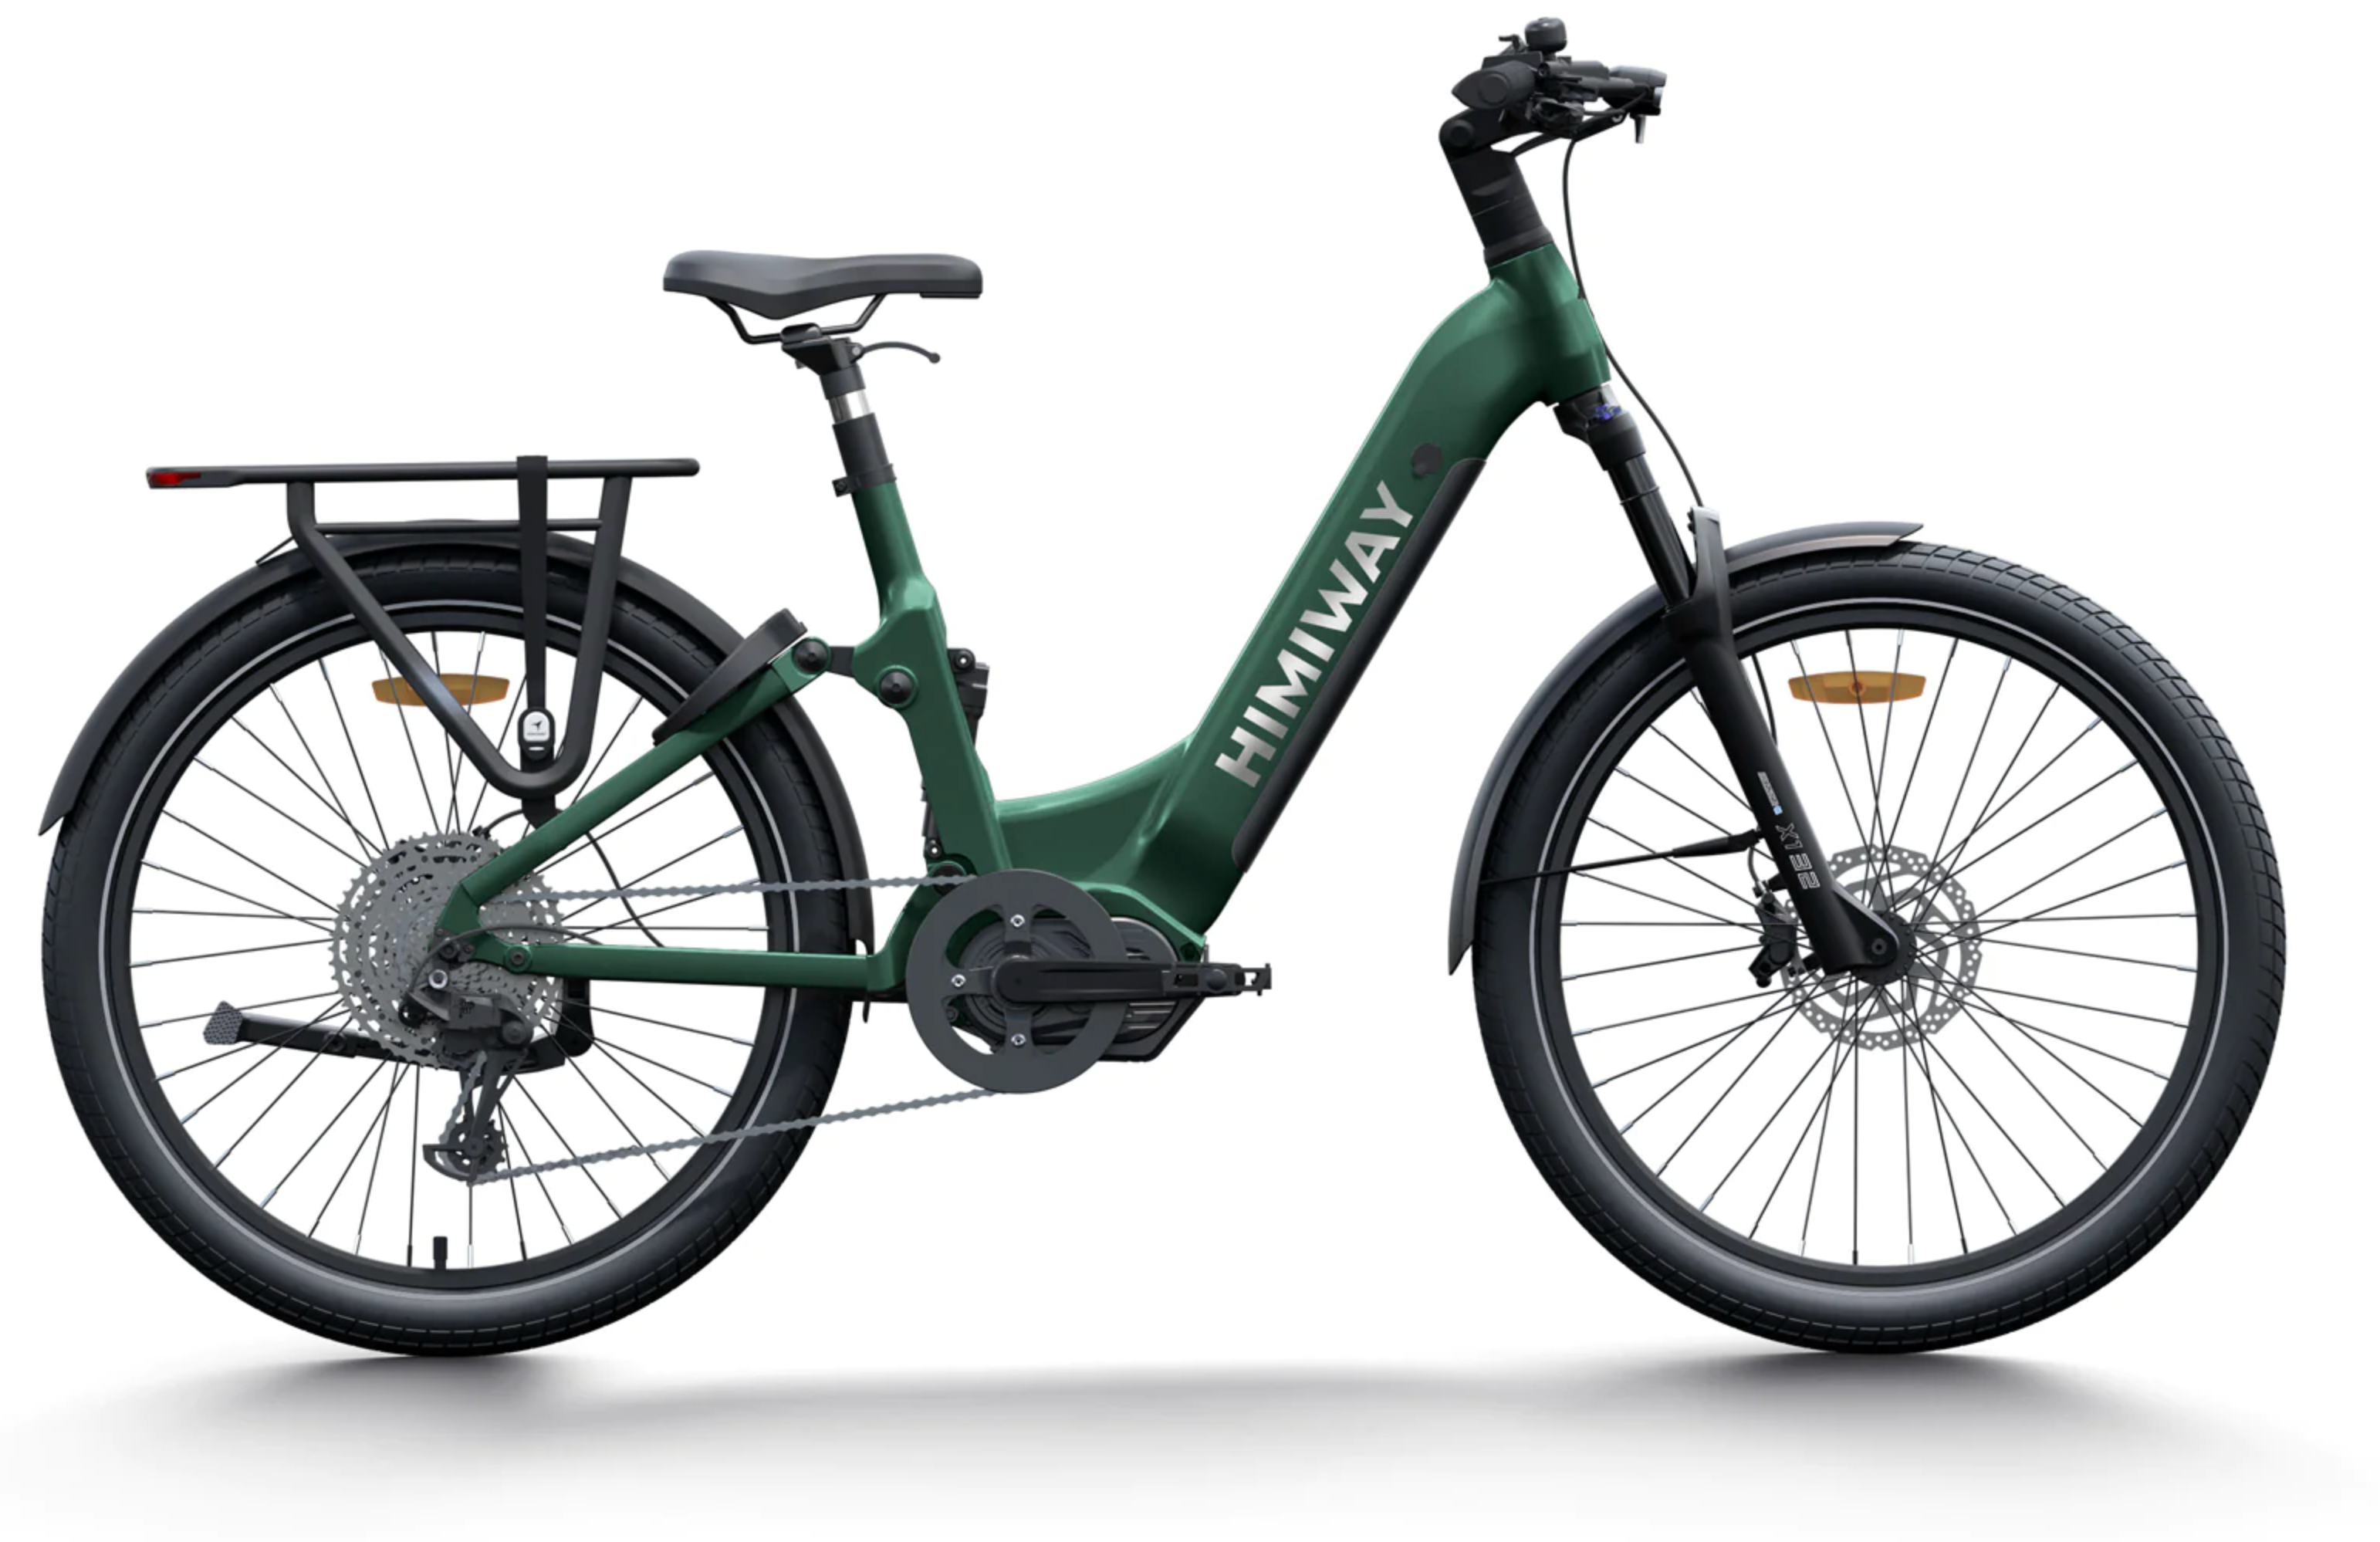 Himiway A7 Pro Urban Commuter Electric Bike